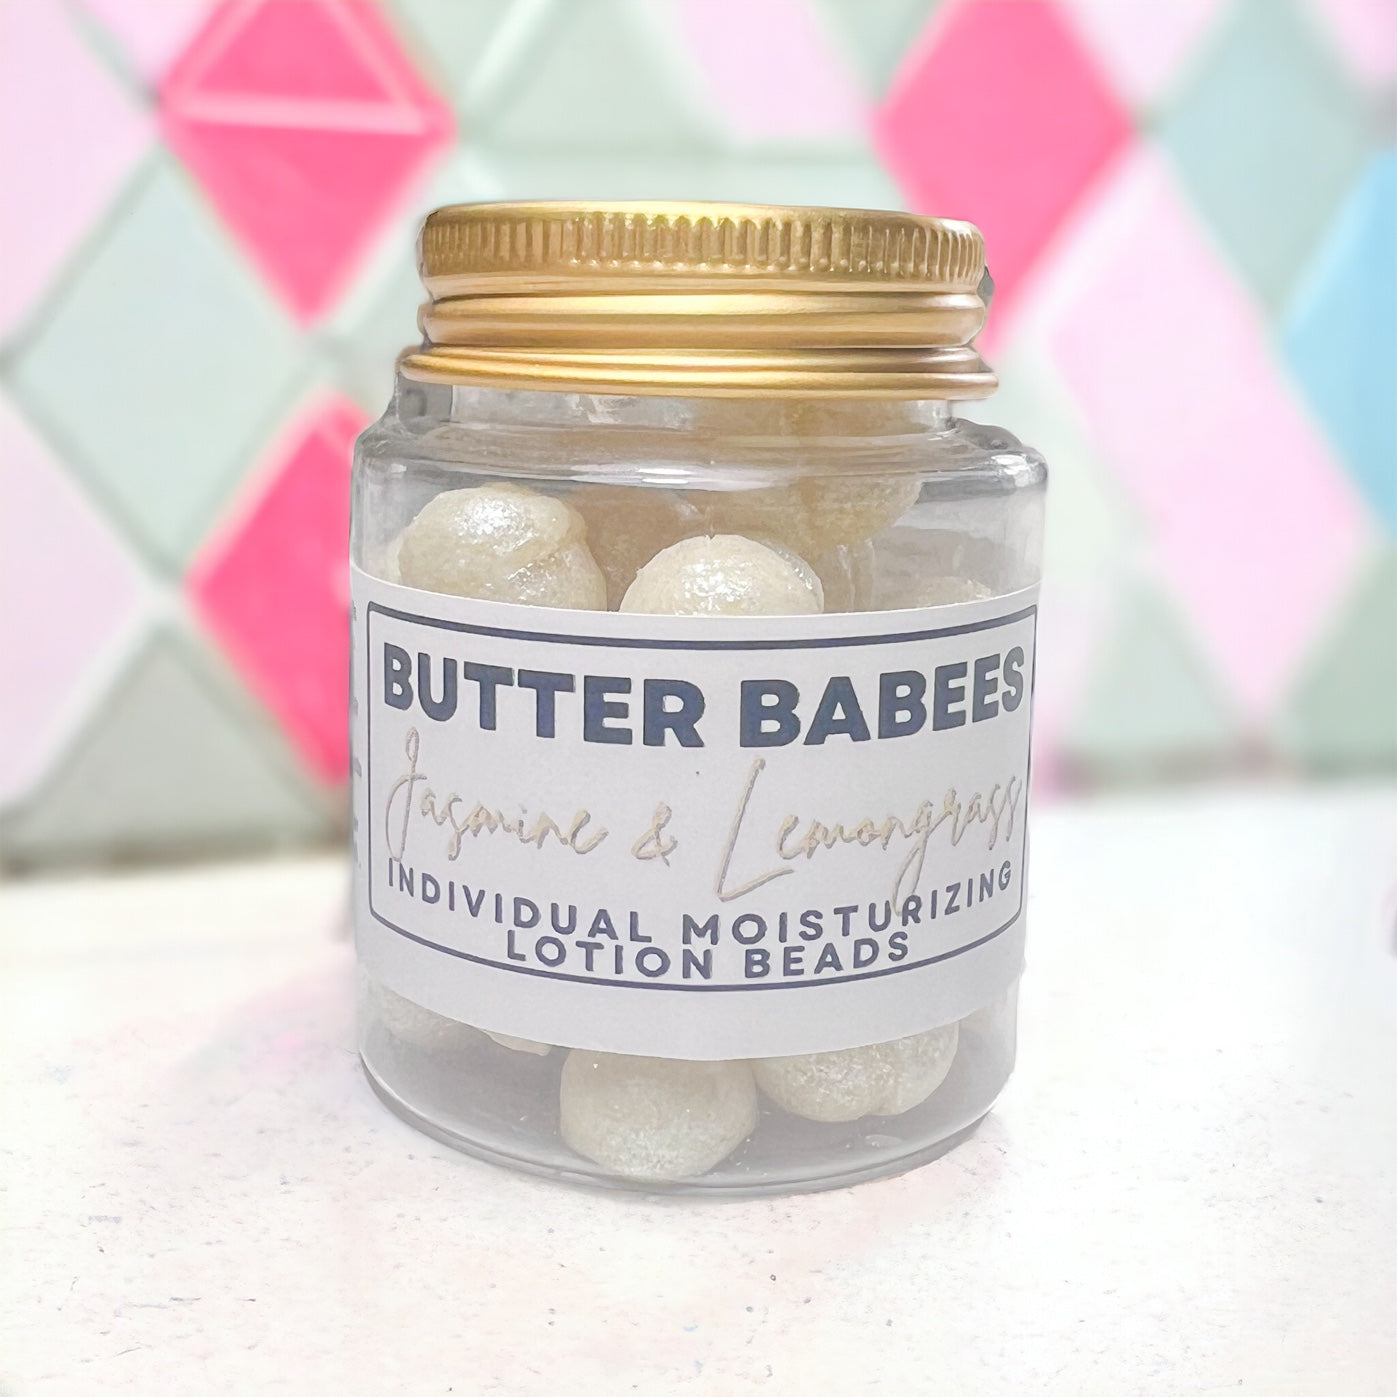 Jasmine & Lemongrass Butter Babees - Perfectly Imperfect Collection